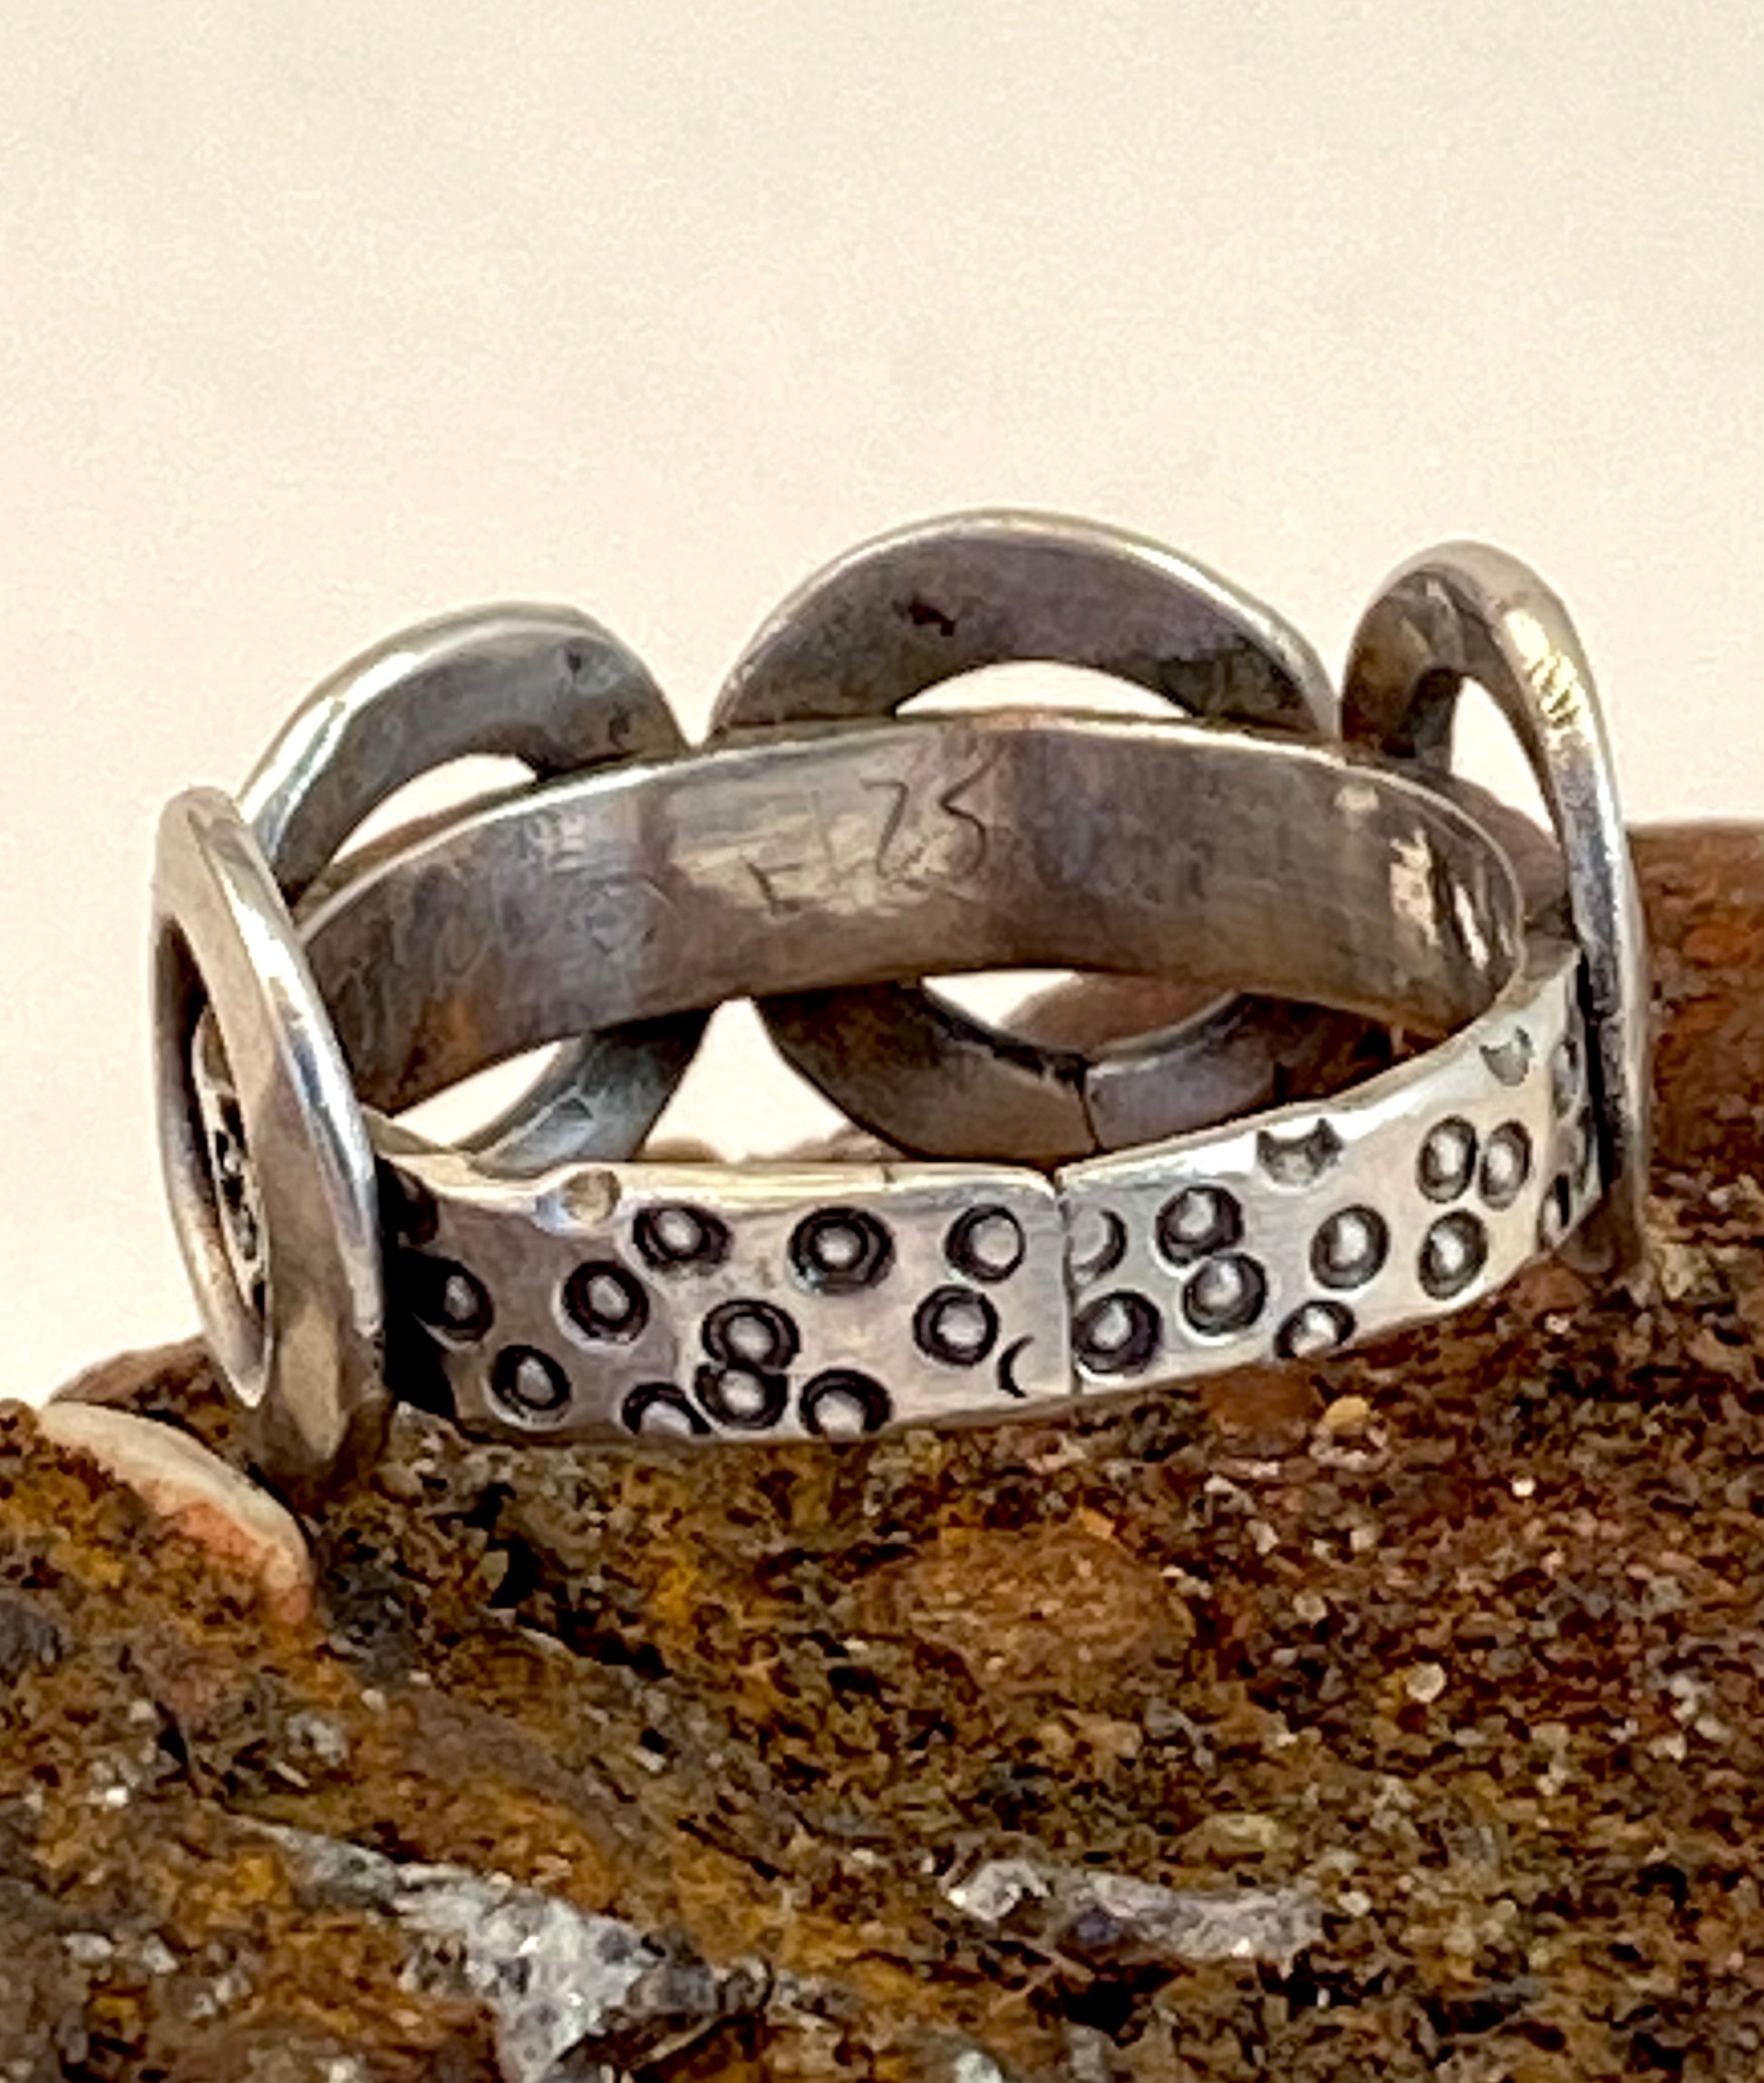 One-of-a-kind sterling silver ring adorned with four smashed hoops around a band textured with tiny stamped circles. Size 7.5.